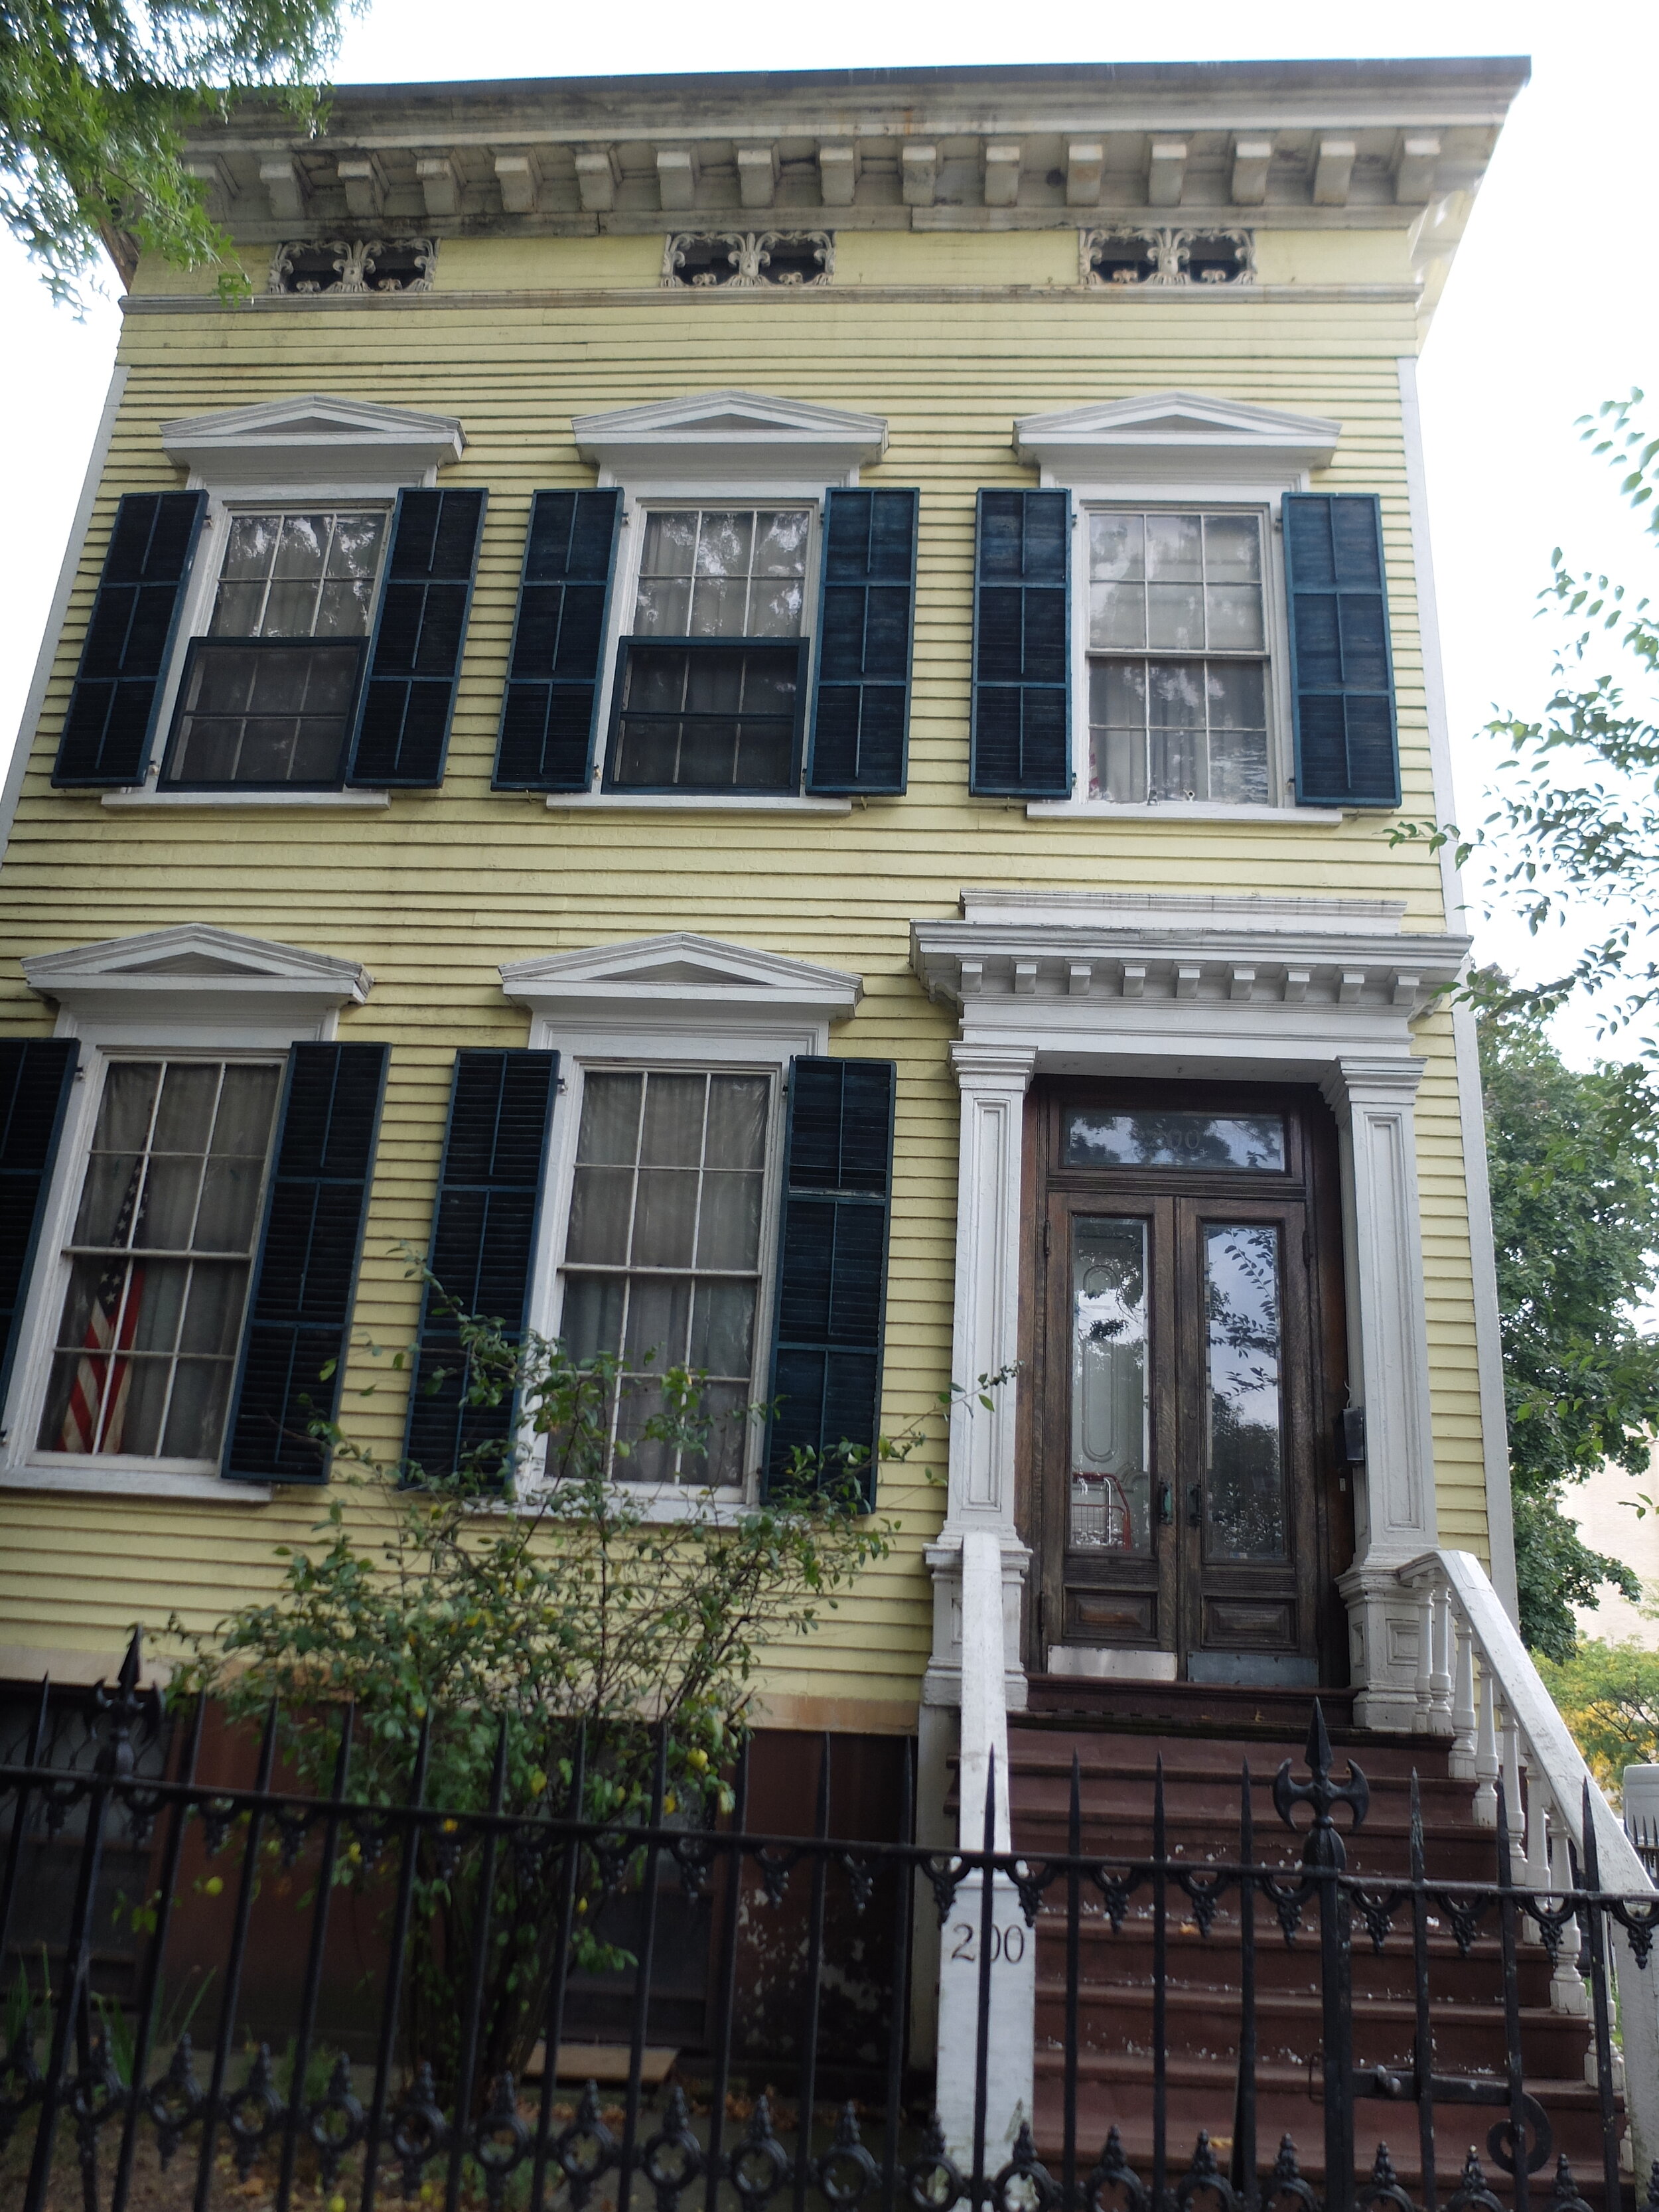 "The  c. 1 840's Joseph Steele house is a survivor from when the area was still farms and suburban villas. One could once see the harbor from the widow’s walk and cupola."